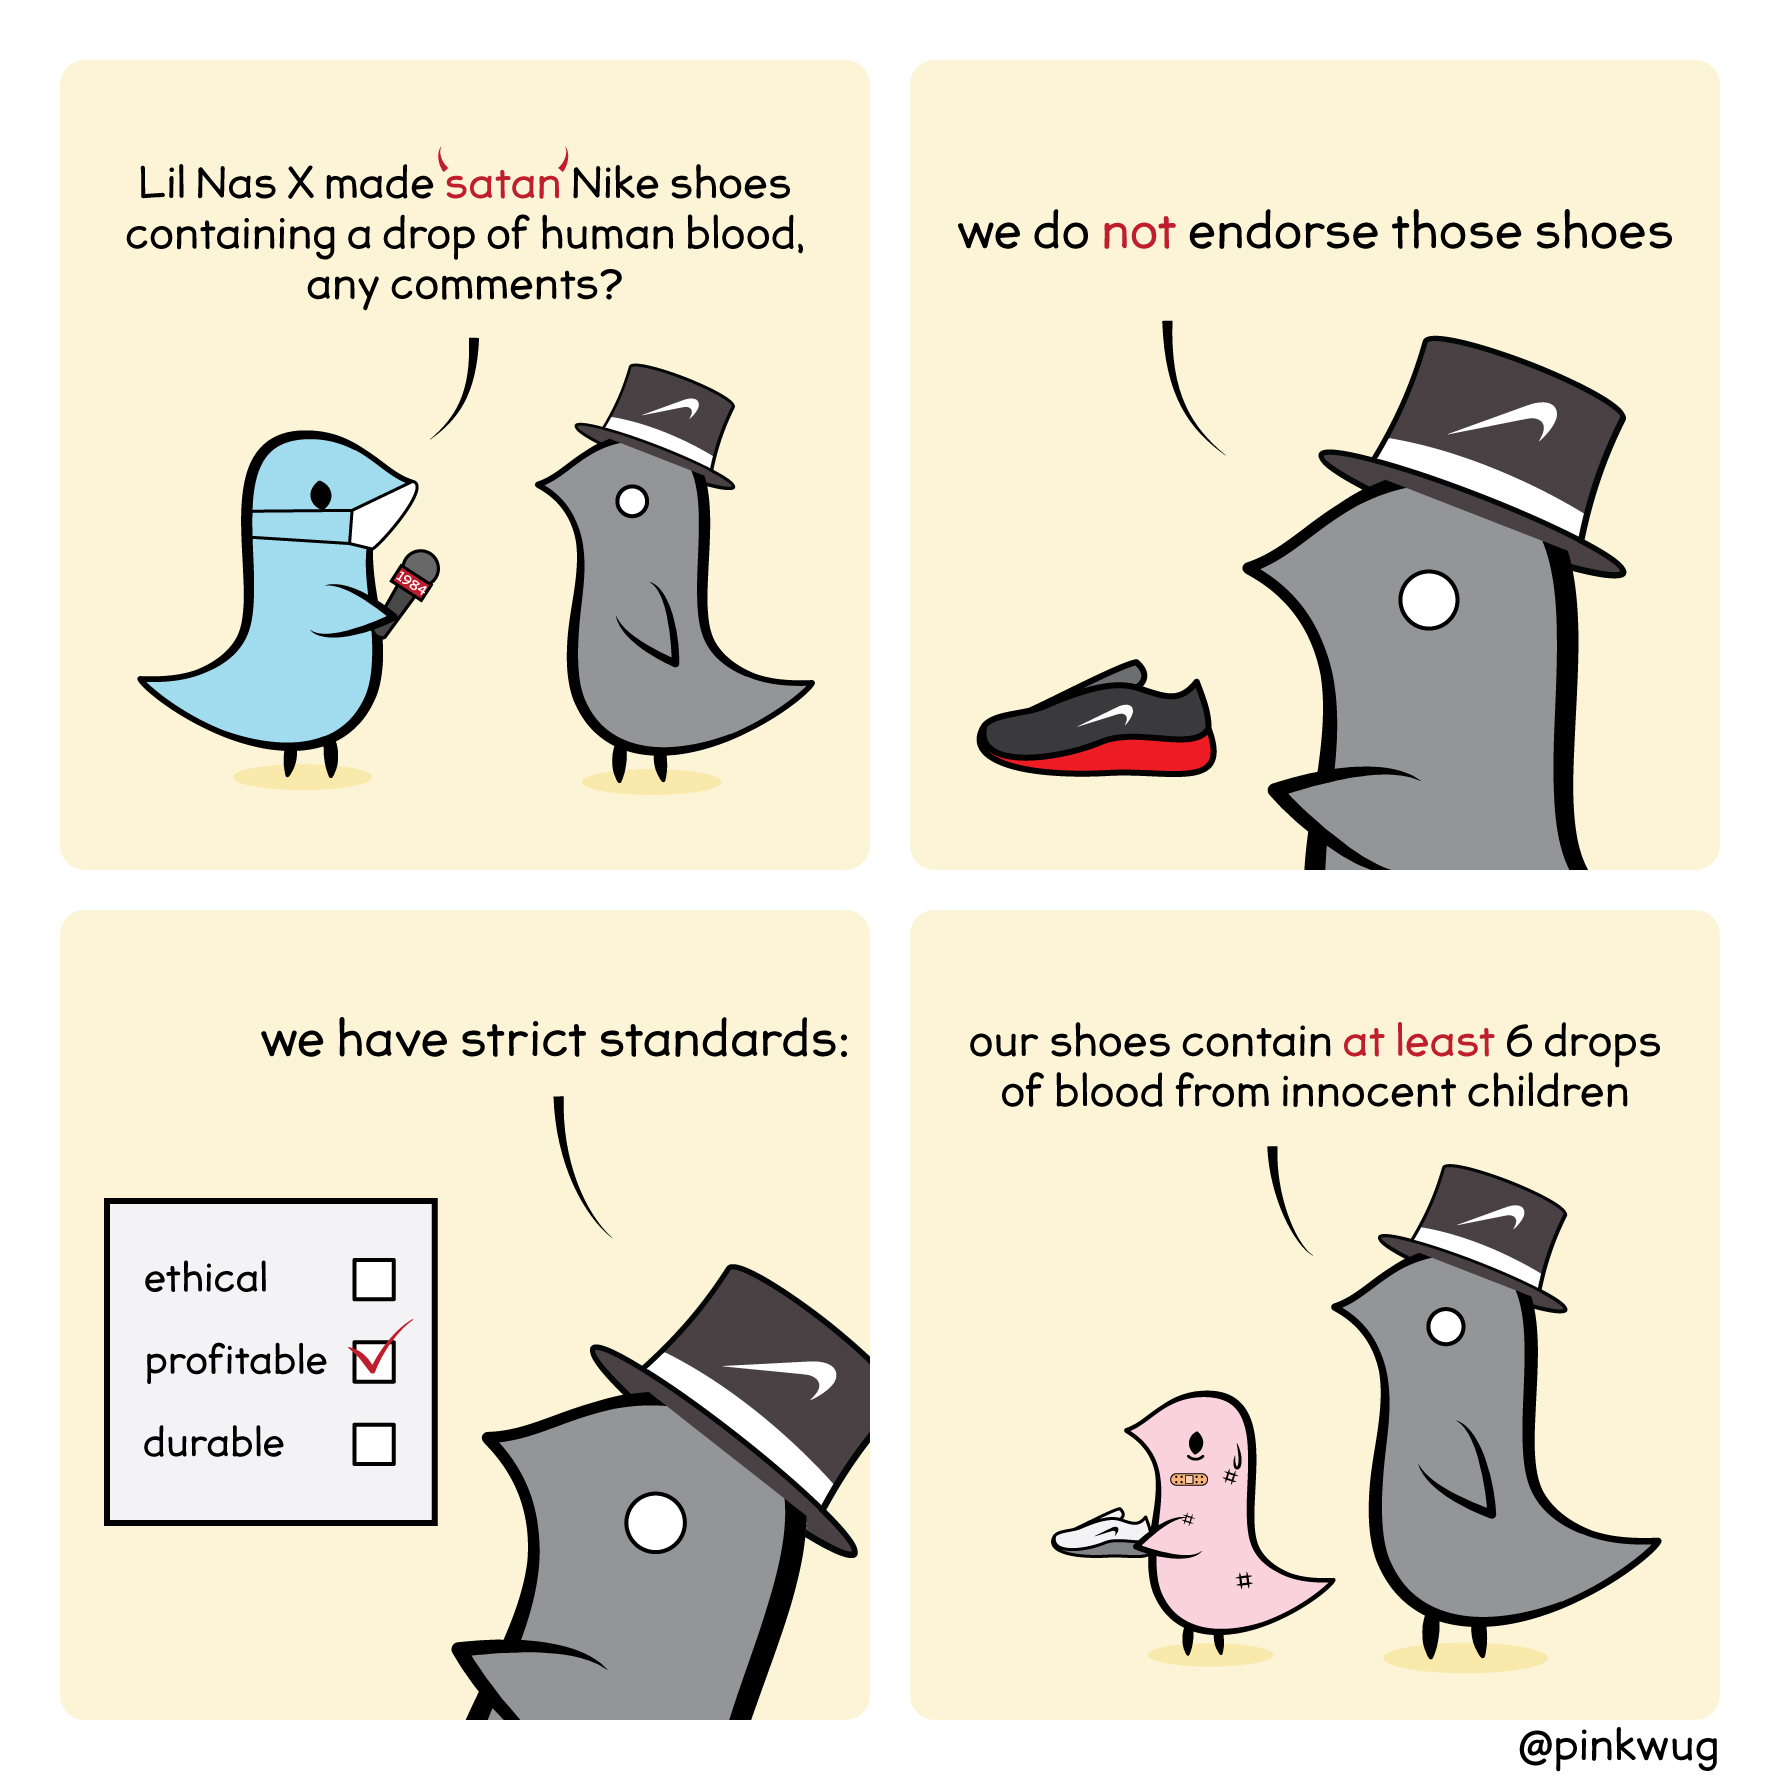 pinkwug comic: Reporter says "Lil Nas X made 'satan' Nike shoes containing a drop of human blood, any comments?
Nike wug says "We do not endorse those shoes"
"we have strict standards" (shows checklist with only 'profitable' checked while 'ethical' and 'durable' are not)
"Our shoes contain at least 6 drops of blood from innocent children"